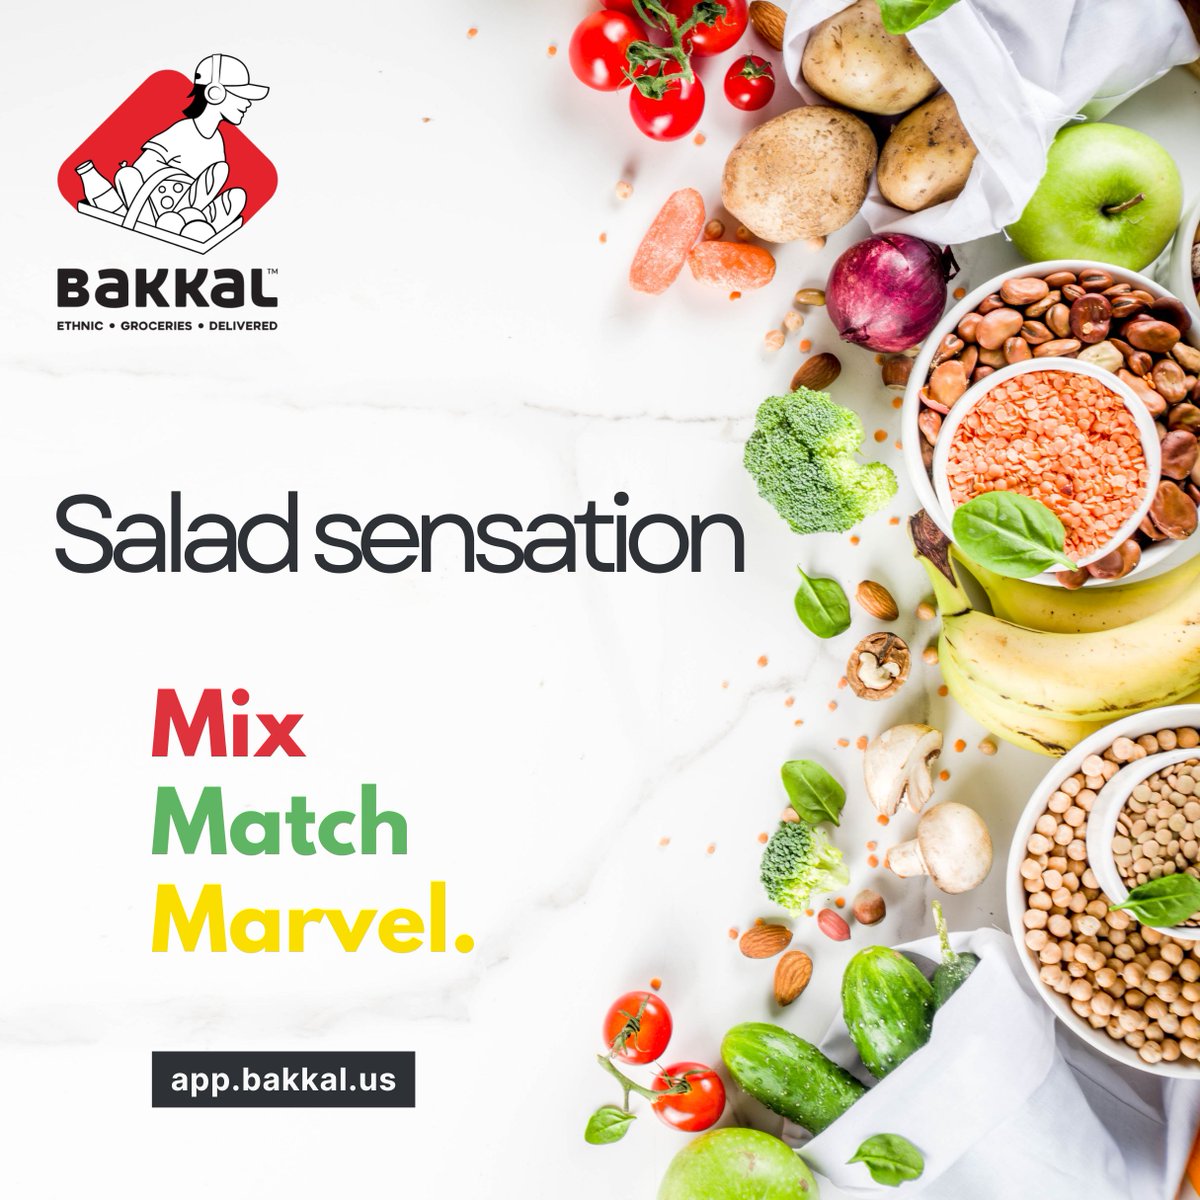 🥗 Salad Sensation! Mix, match, marvel. Craft your dream salad with our fresh greens and flavorful fixings. 🥗✨ #SaladGoals #BakkalBowls #FreshAndFlavorful #SaladSavvy #EatTheRainbow #HealthyEats #SaladInspiration #HealthyLiving #Nutrition #SaladLover